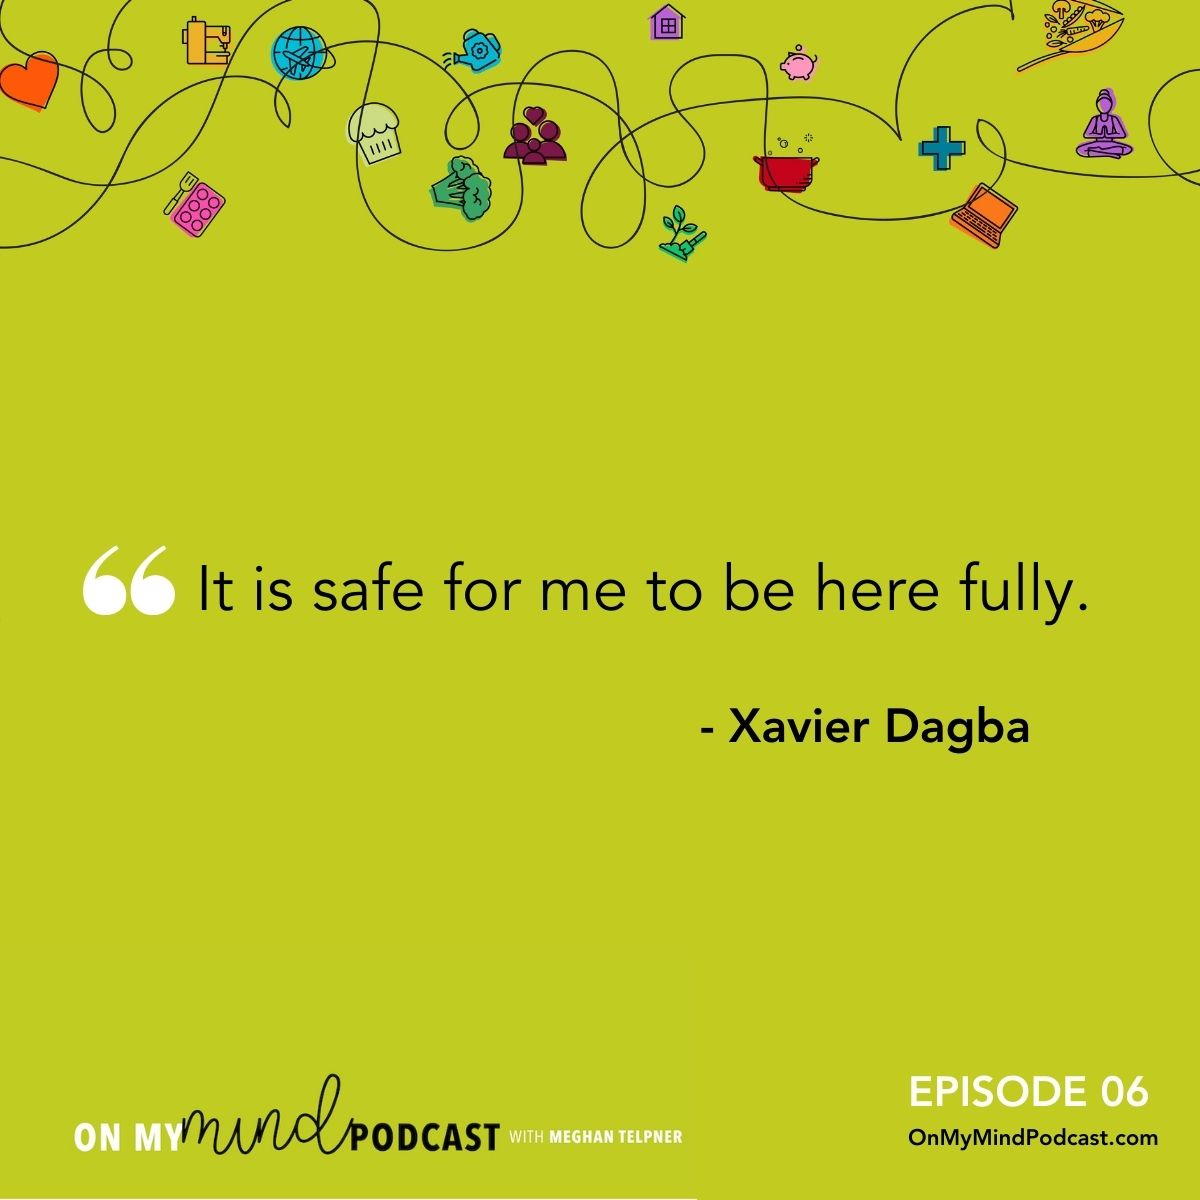 On My Mind Podcast Ep 6 - quote by Xavier Dagba 